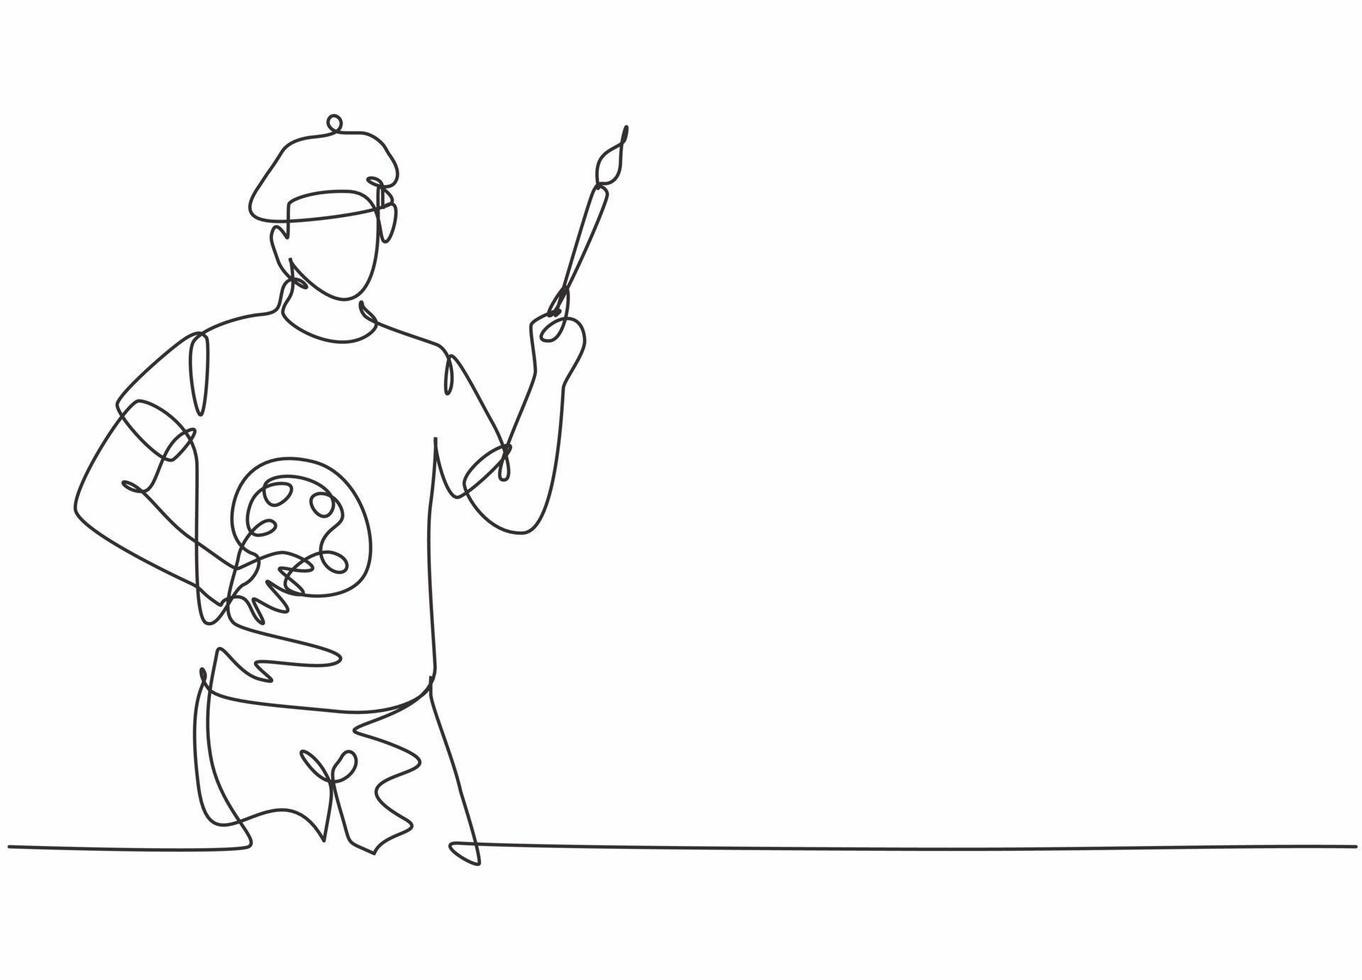 Continuous one line drawing of young painter with flat cap holding paintbrush and color palette. Professional job profession minimalist concept. Single line draw design vector graphic illustration